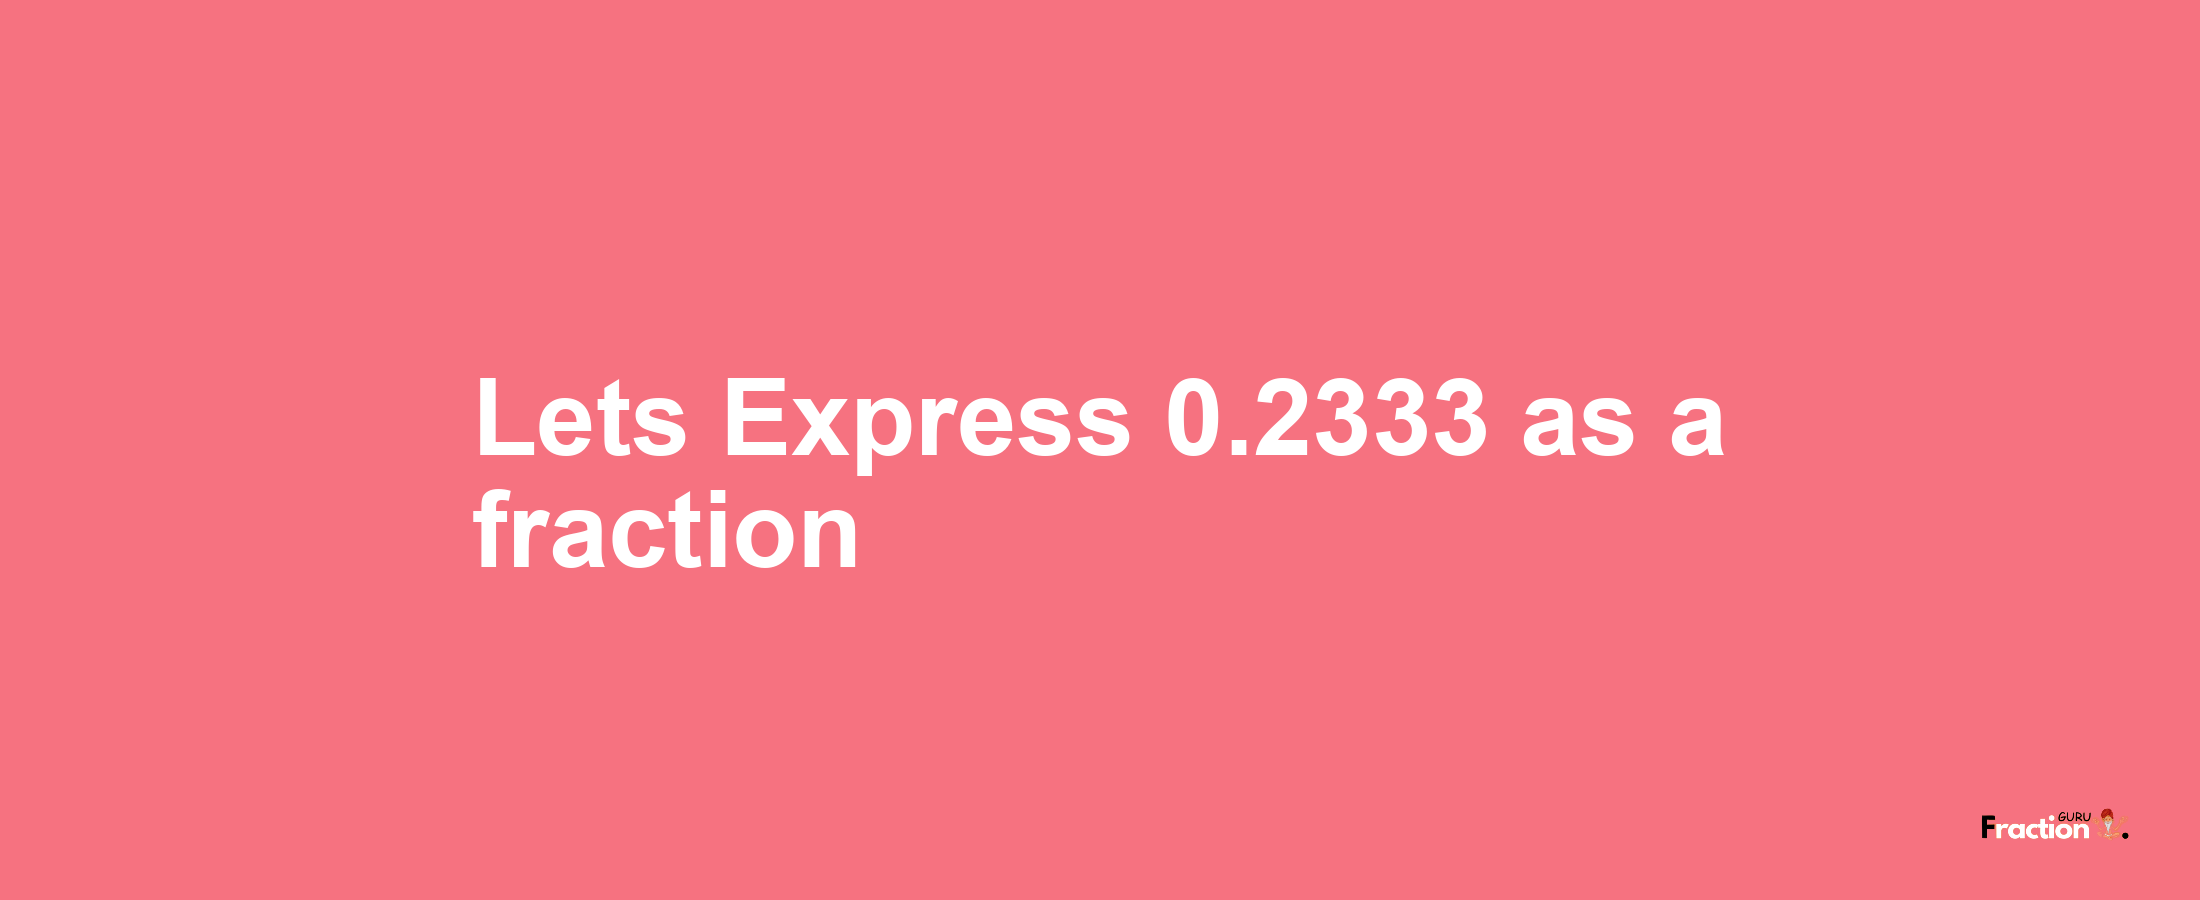 Lets Express 0.2333 as afraction